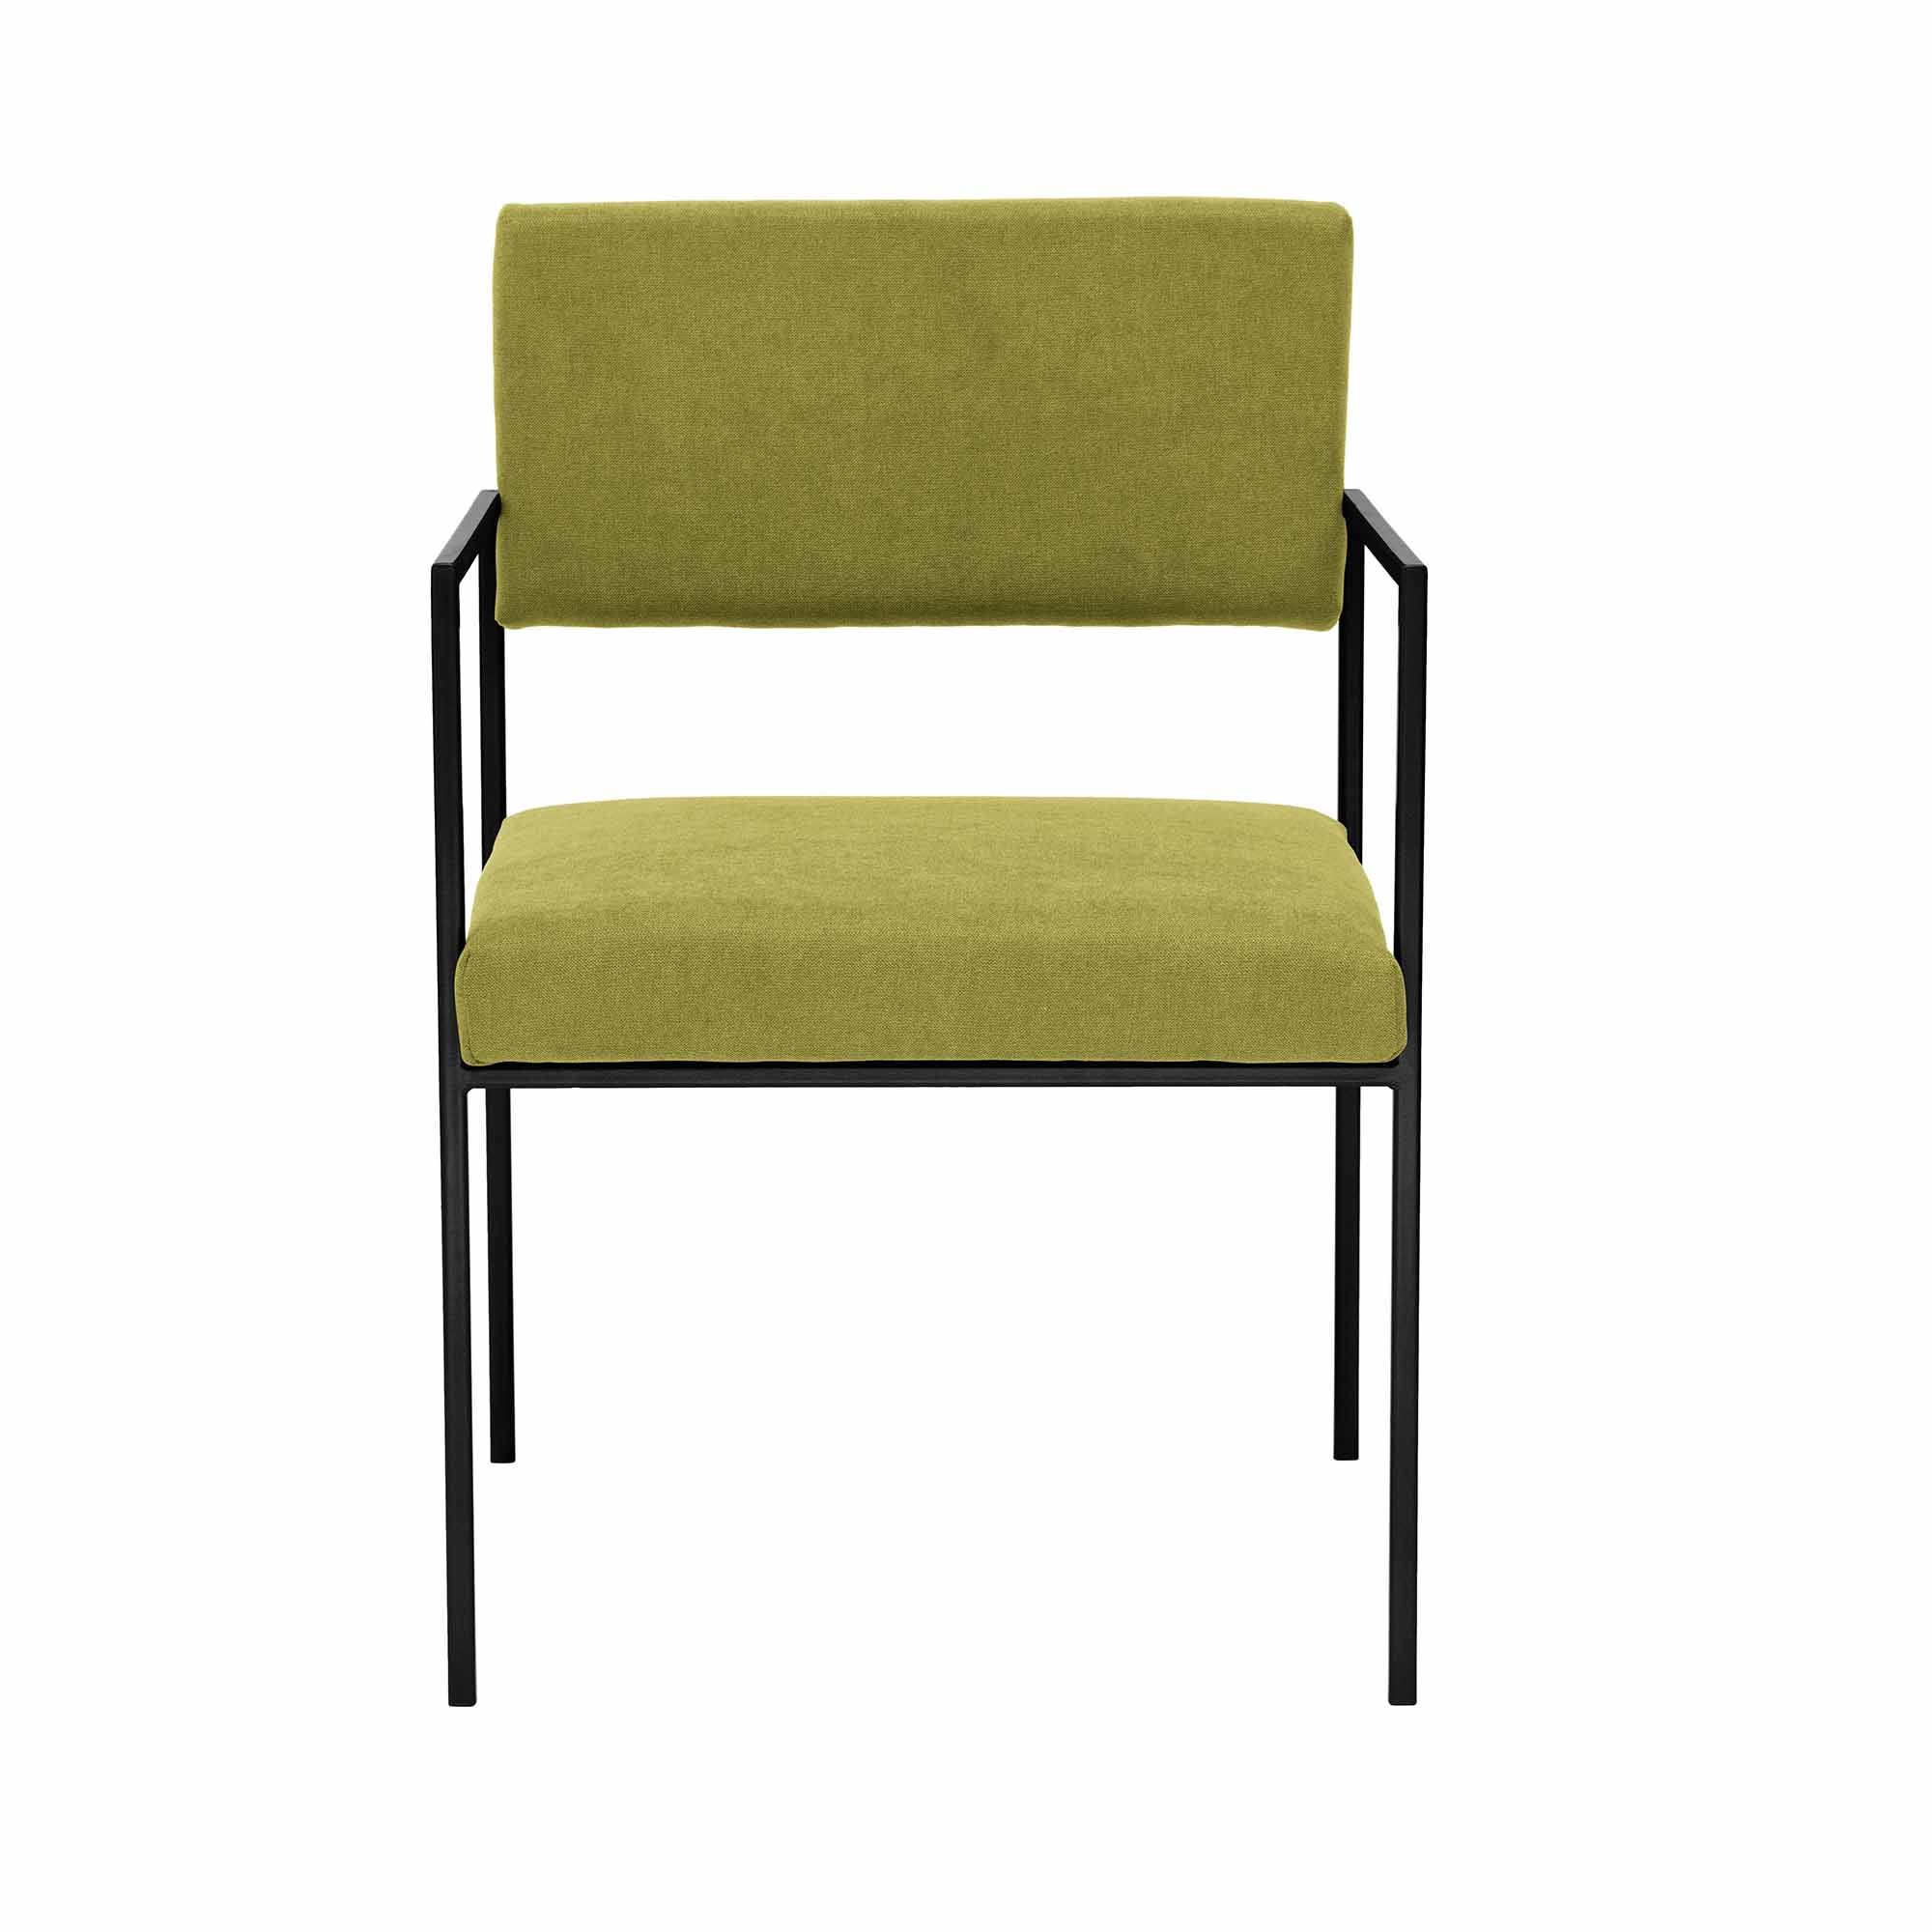 CUBE Armchair, Powder-Coated Steel Frame front view green fabric, black frame